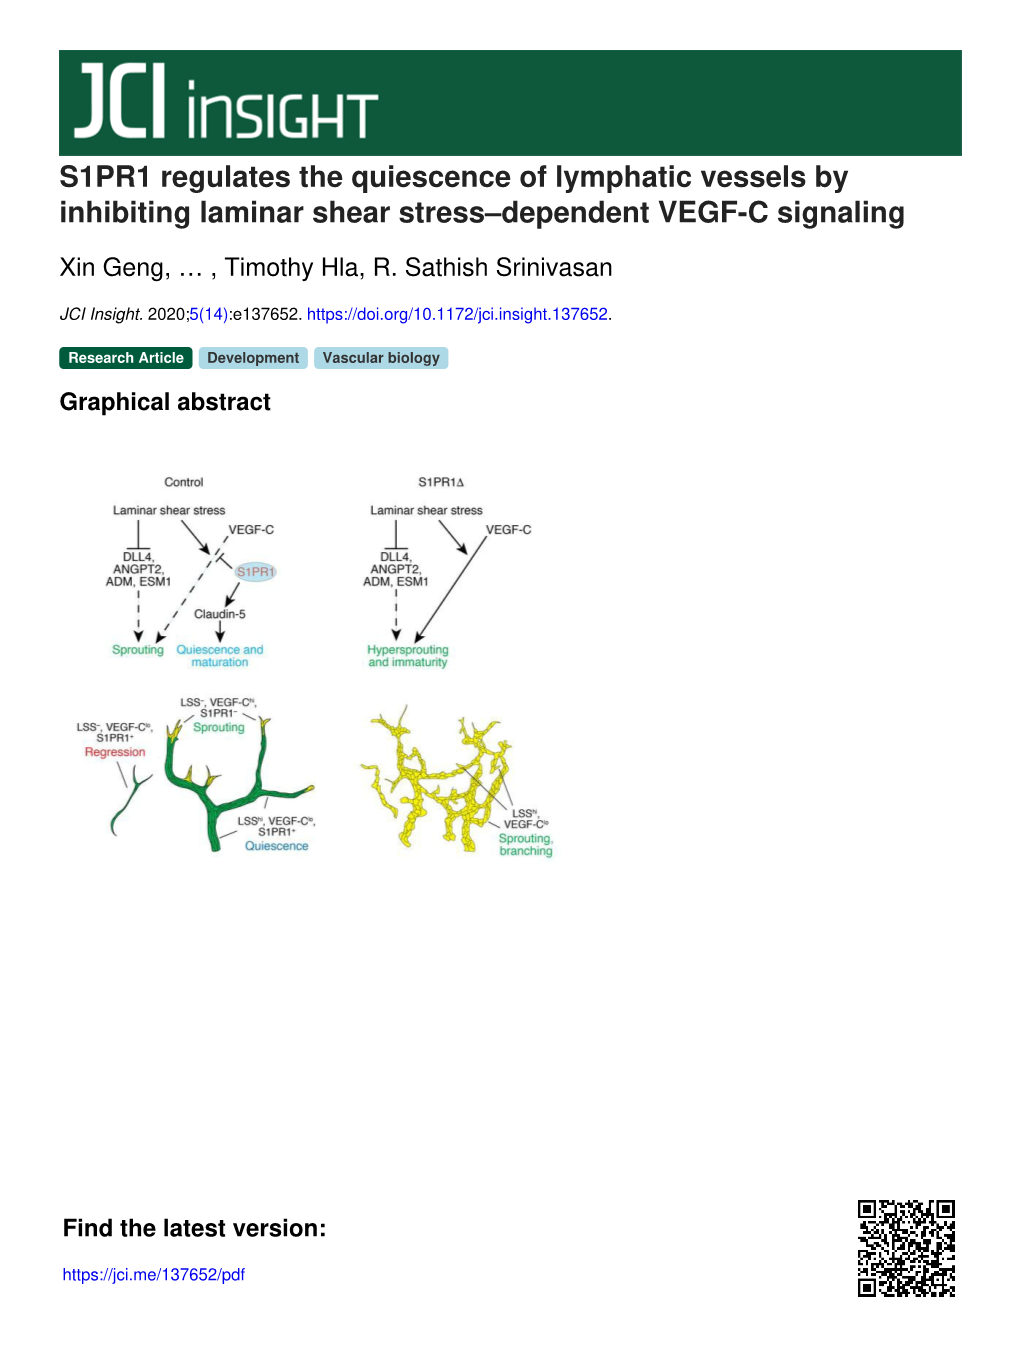 S1PR1 Regulates the Quiescence of Lymphatic Vessels by Inhibiting Laminar Shear Stress–Dependent VEGF-C Signaling